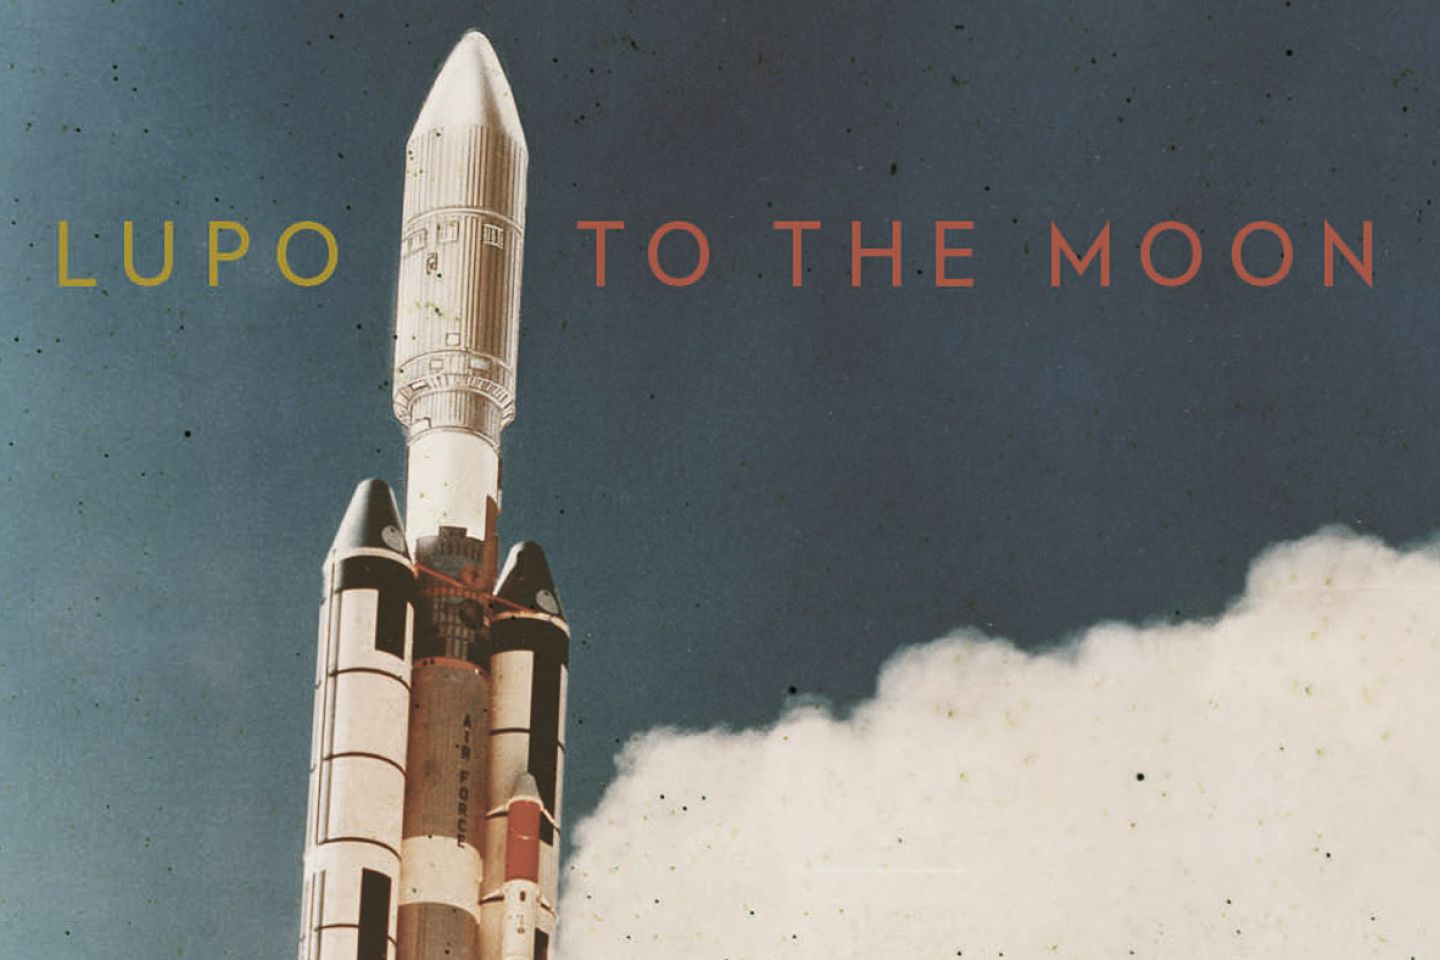 Lupo “To the Moon” (Riff Records/Grand Tree House Records, 2019)